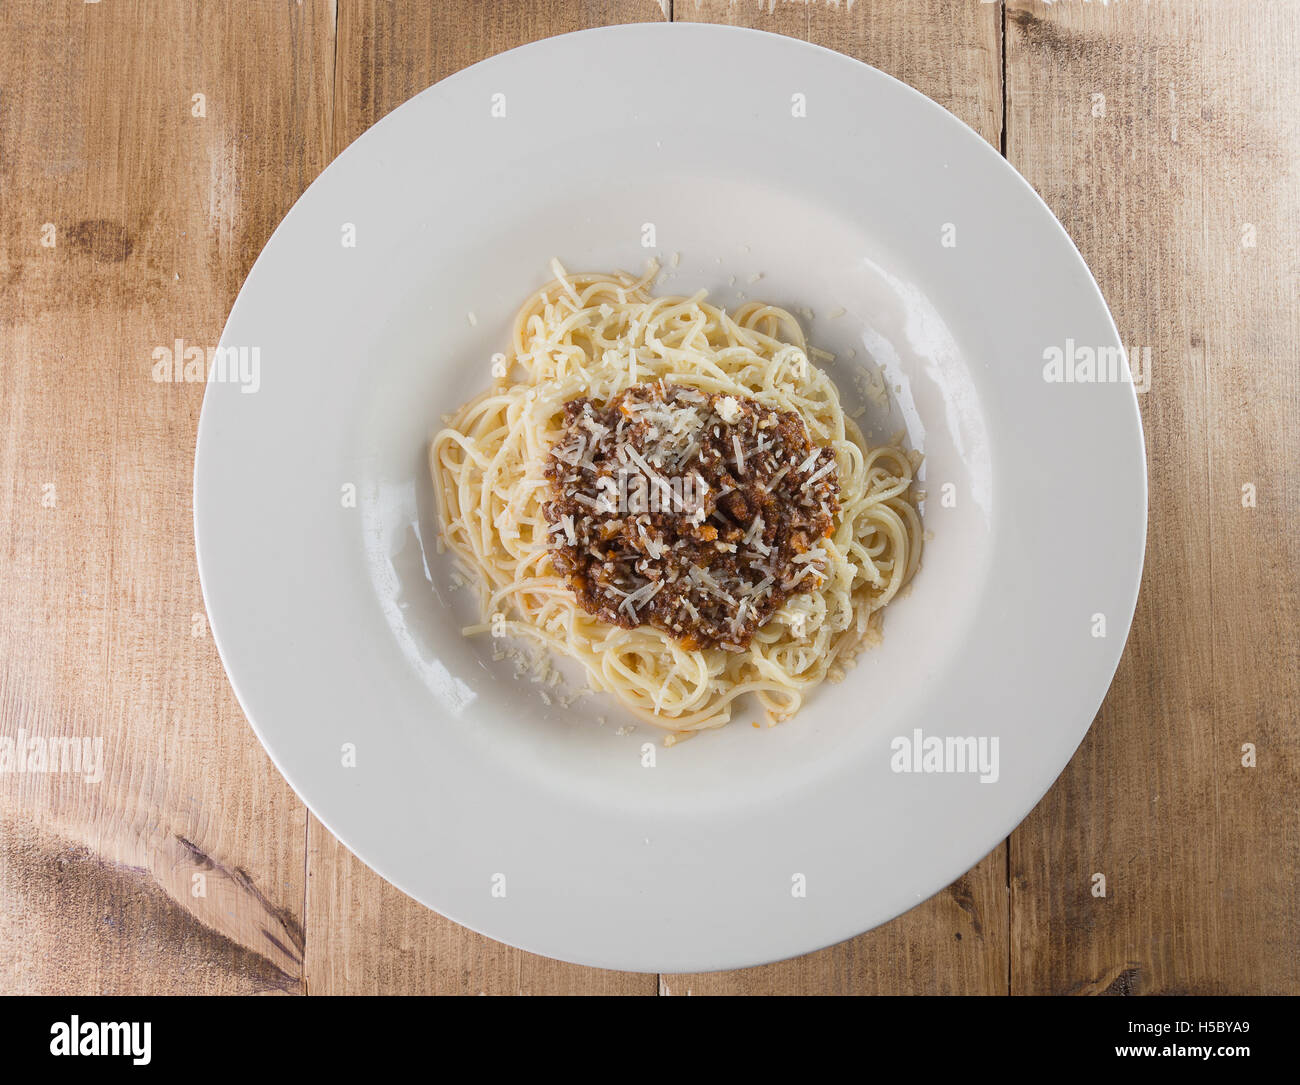 pasta bolognese in plate on wooden background. Stock Photo